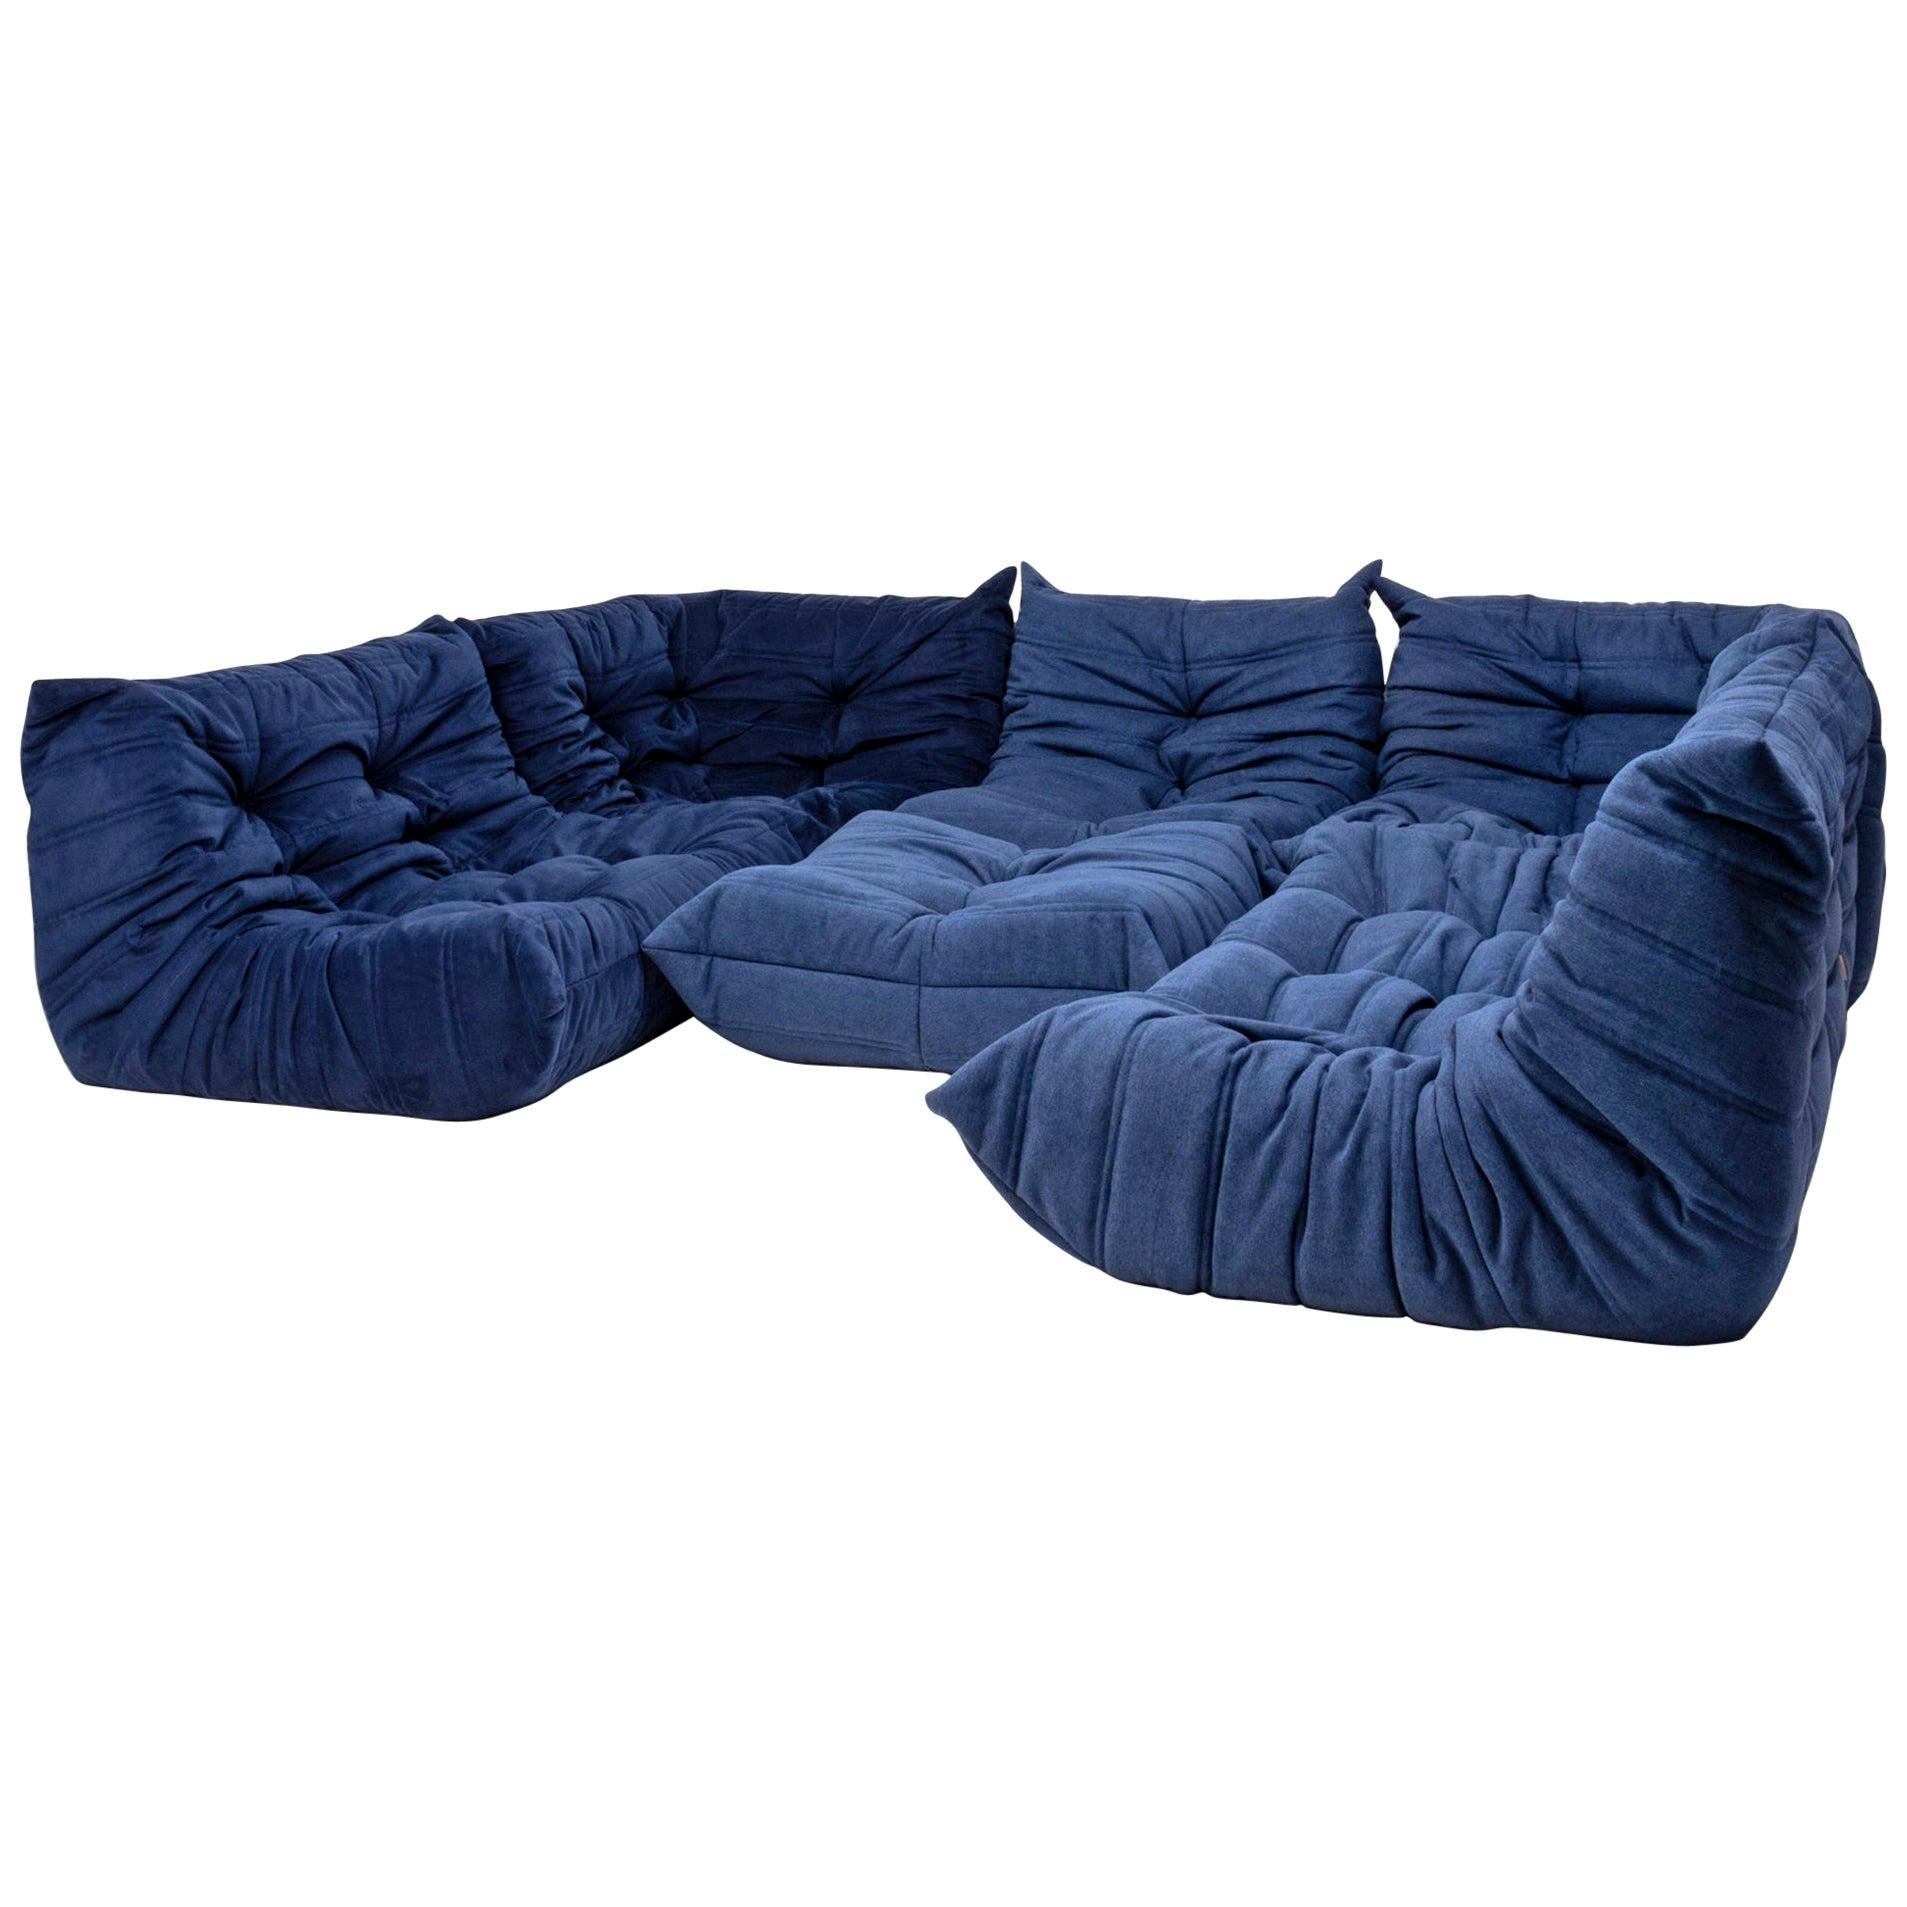 Togo Blue Modular Sofa and Footstool by Michel Ducaroy for Ligne Roset